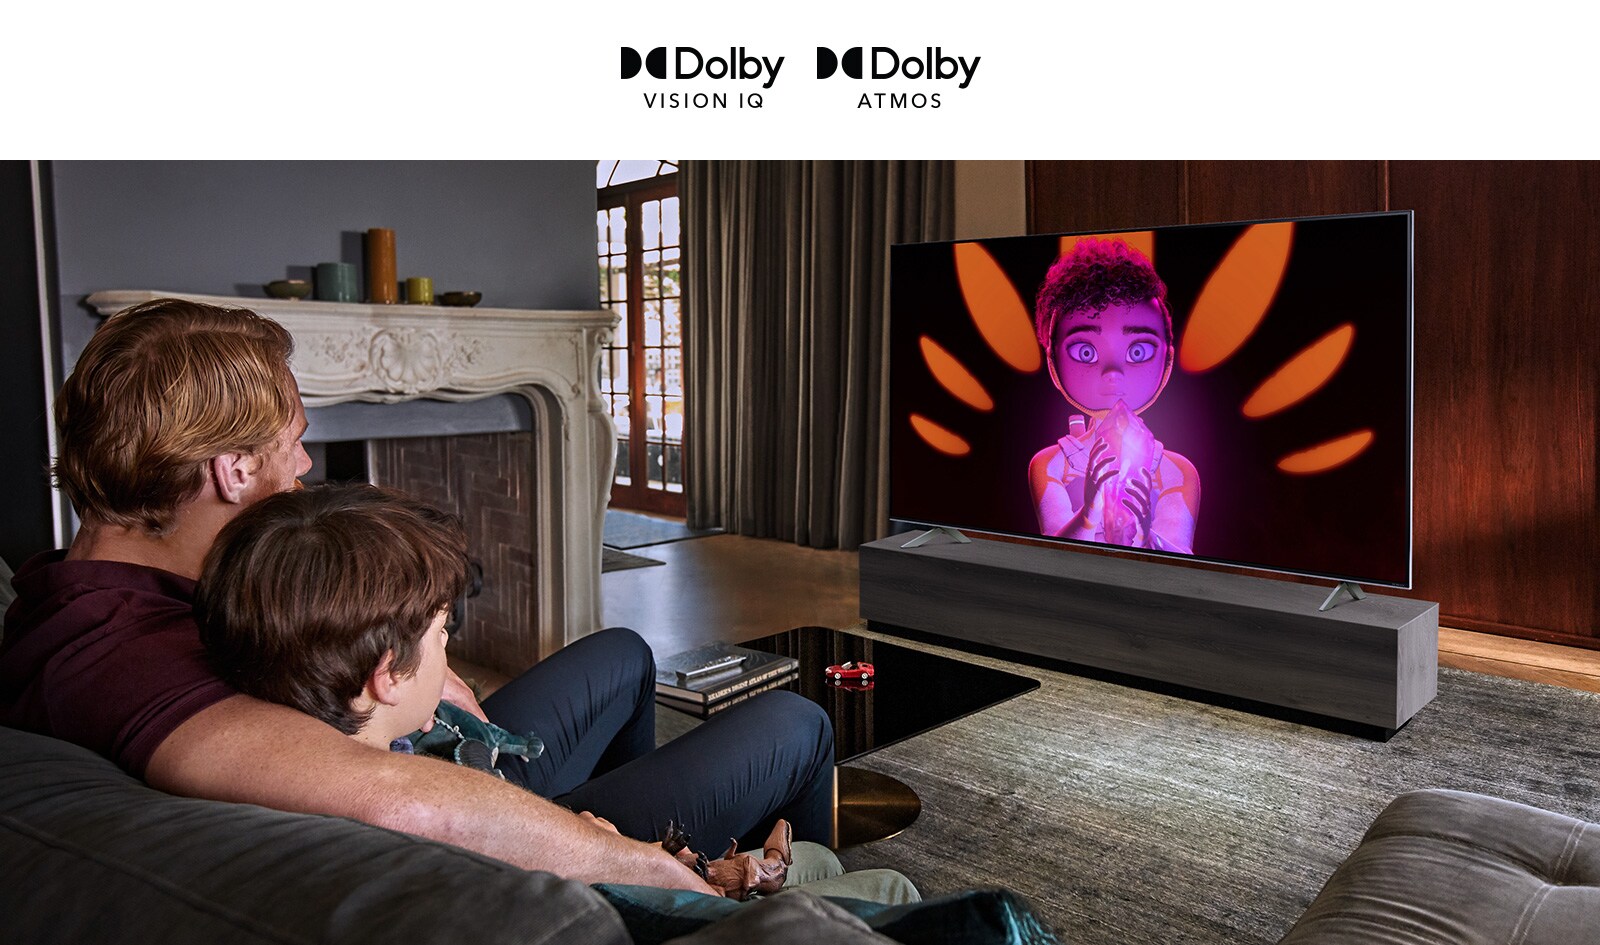 A man and boy sat side-by-side on a sofa watching a movie on a large flatscreen TV. The screen shows an animated character against a black background.